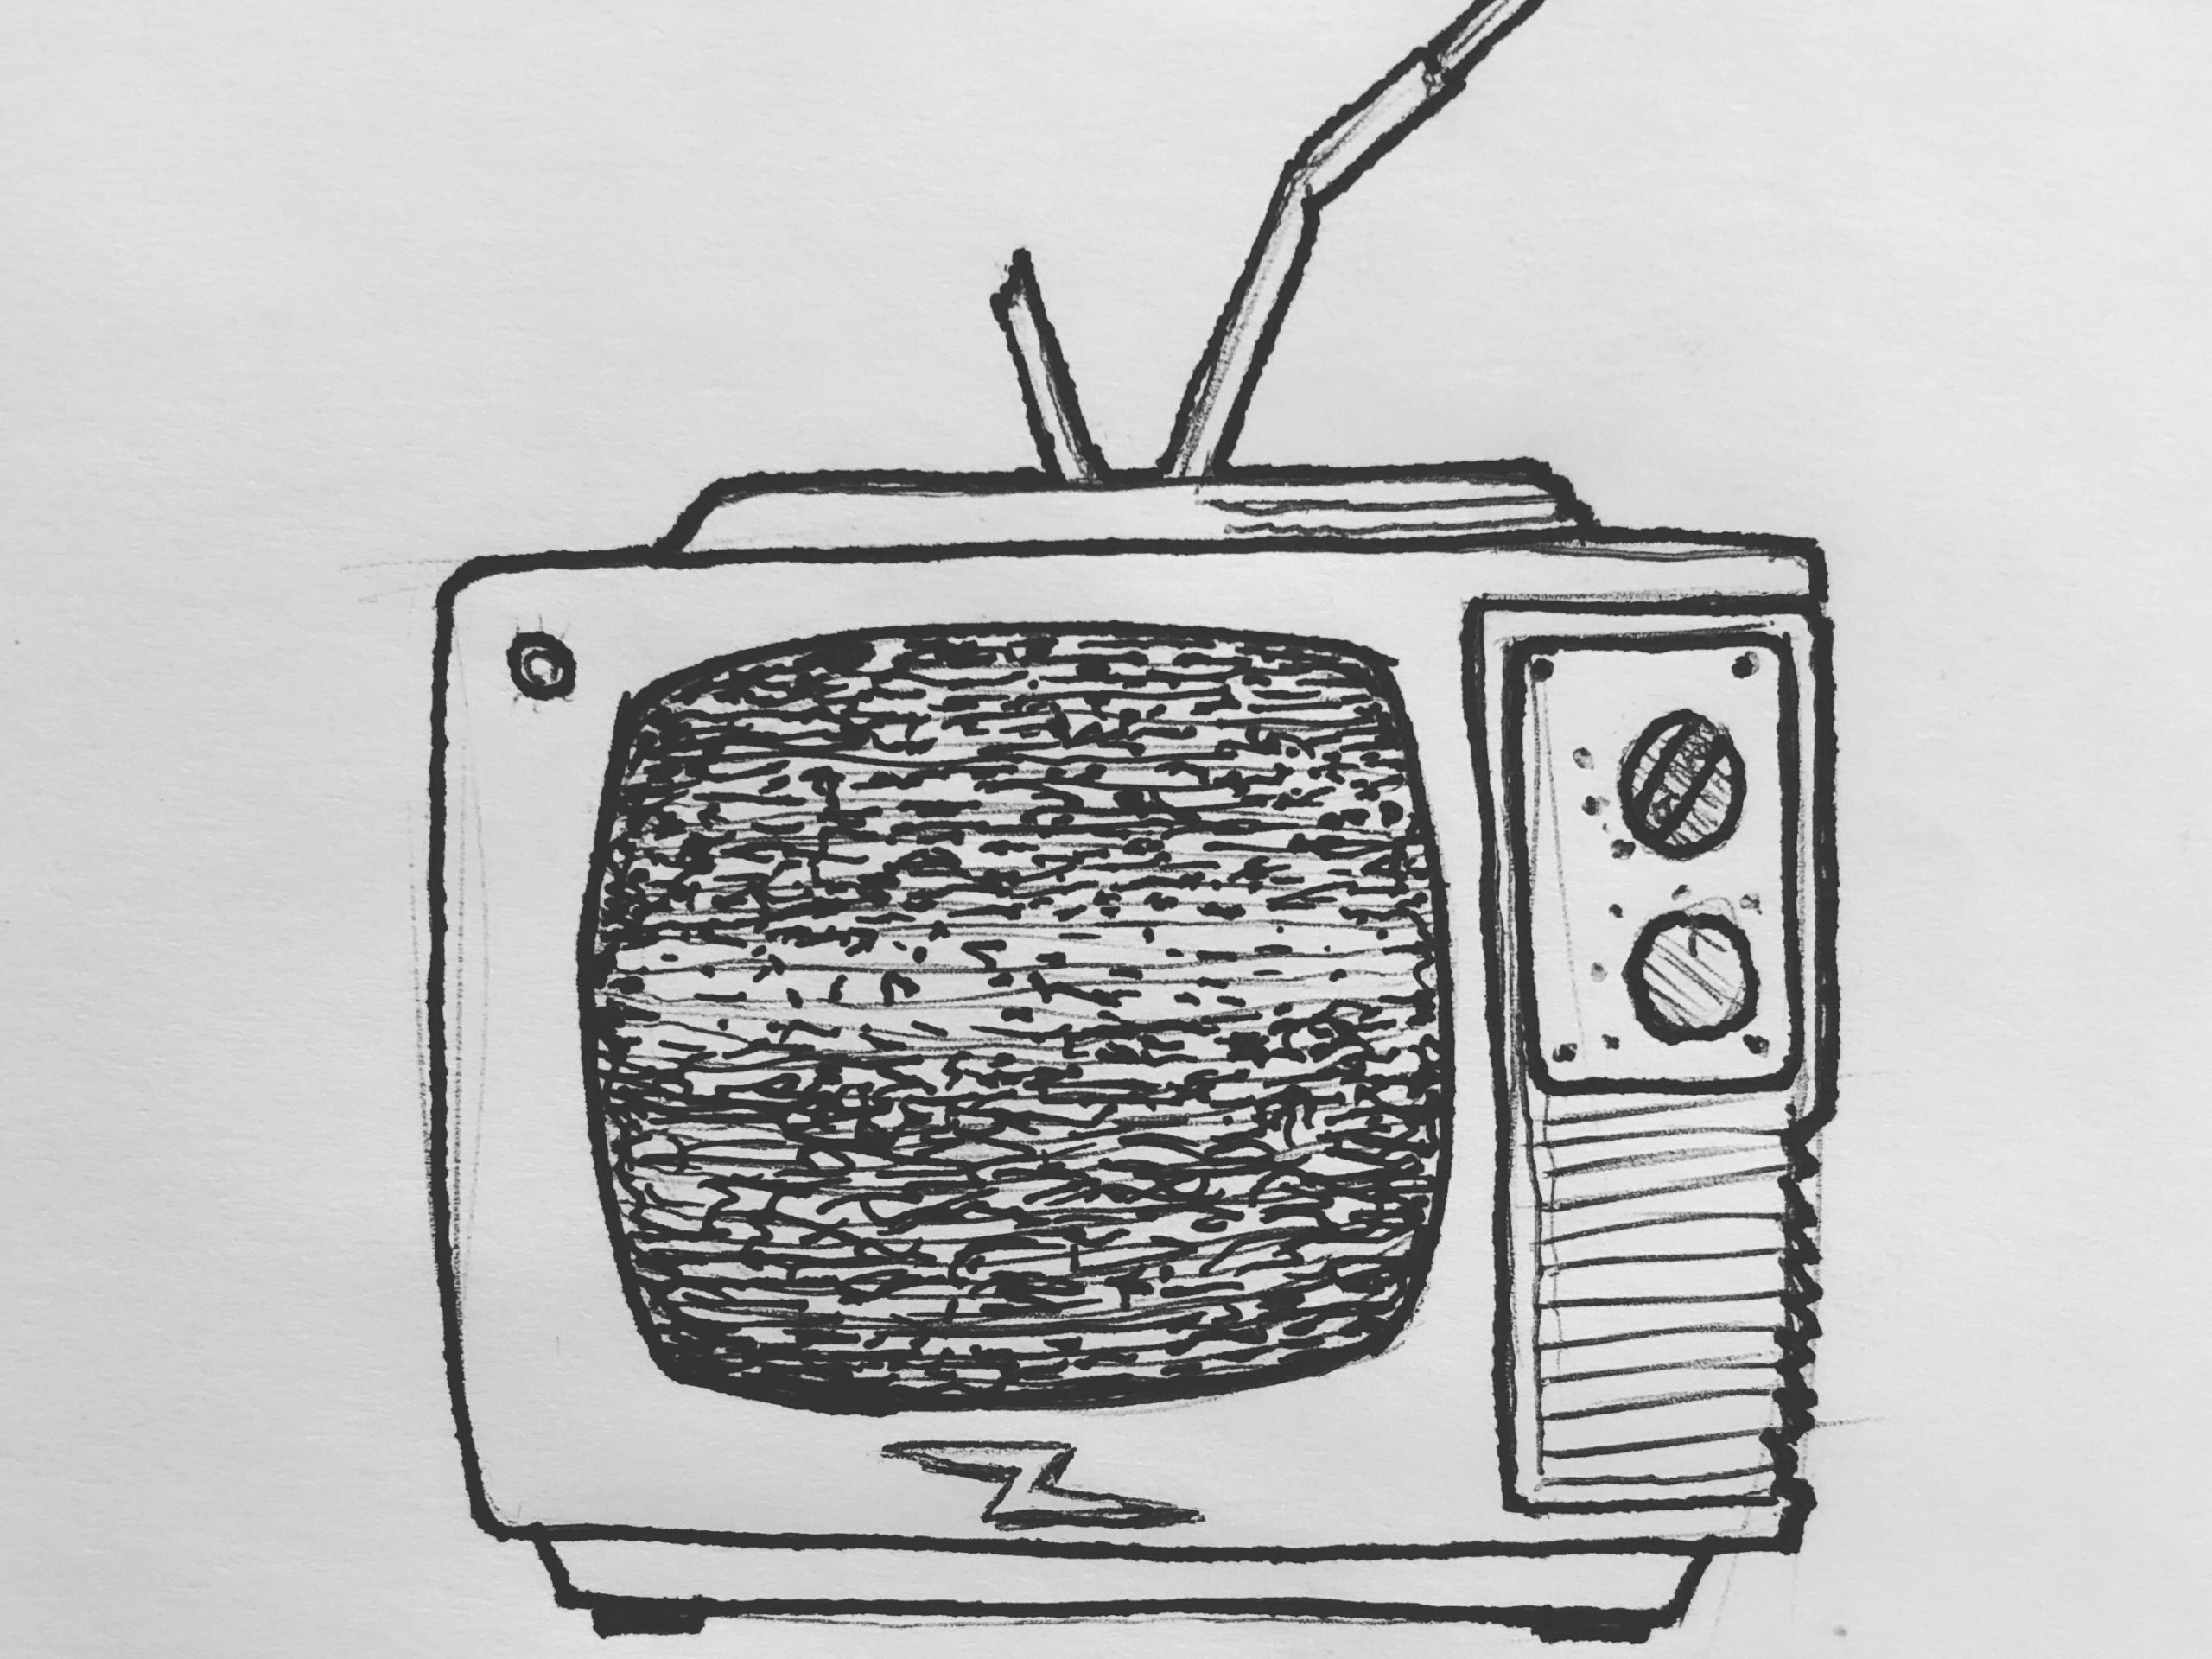 inktober sketch of a zenith TV i recalled from my youth. Its the one we watched christian videos on while my parents were at choir practice.
